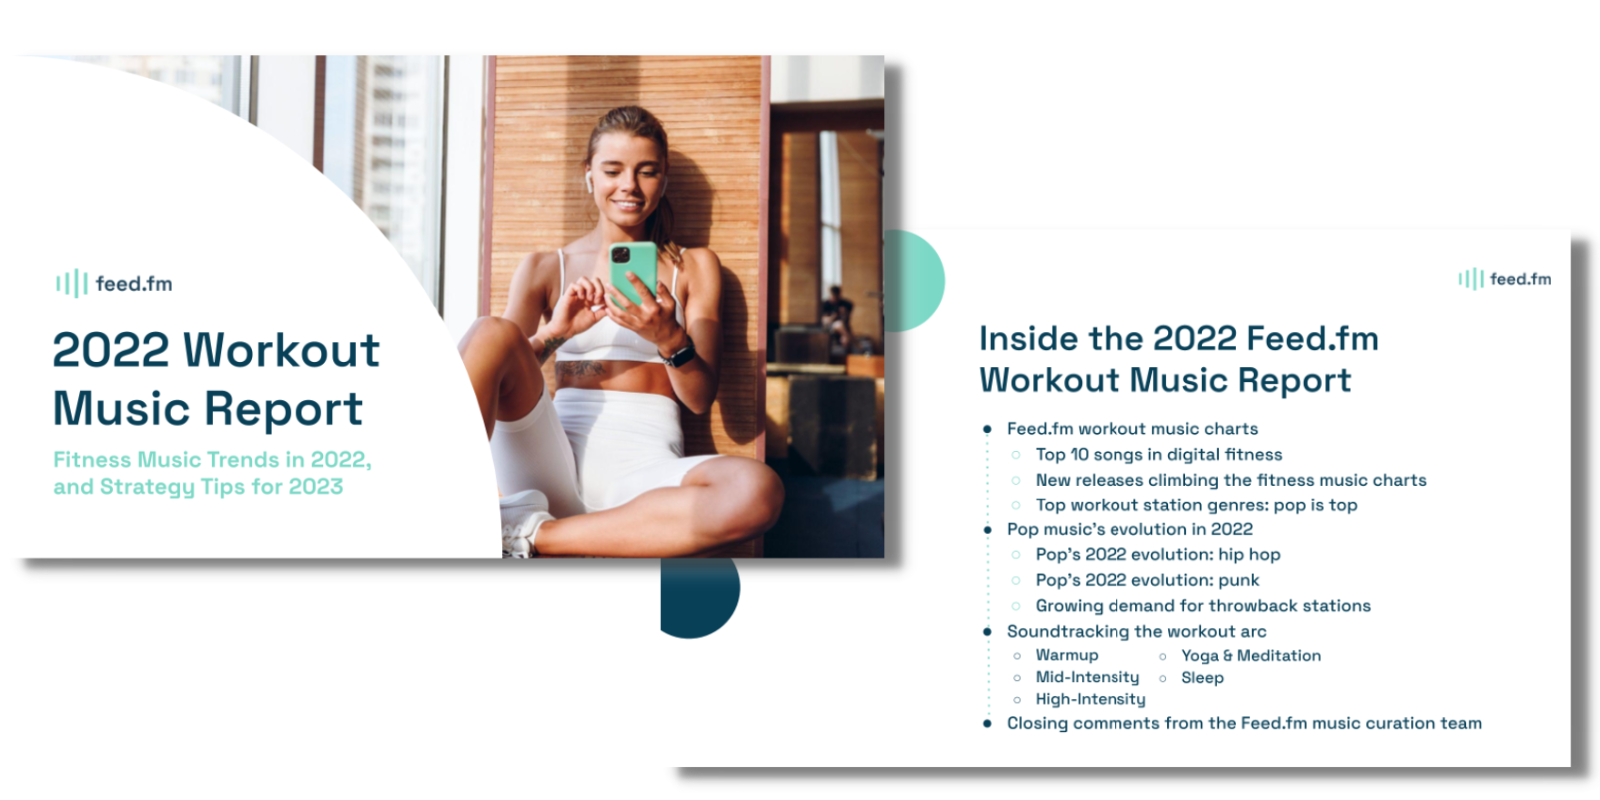 Cover Image Preview of Feed.fm 2022 Wellness and Workout Music Report